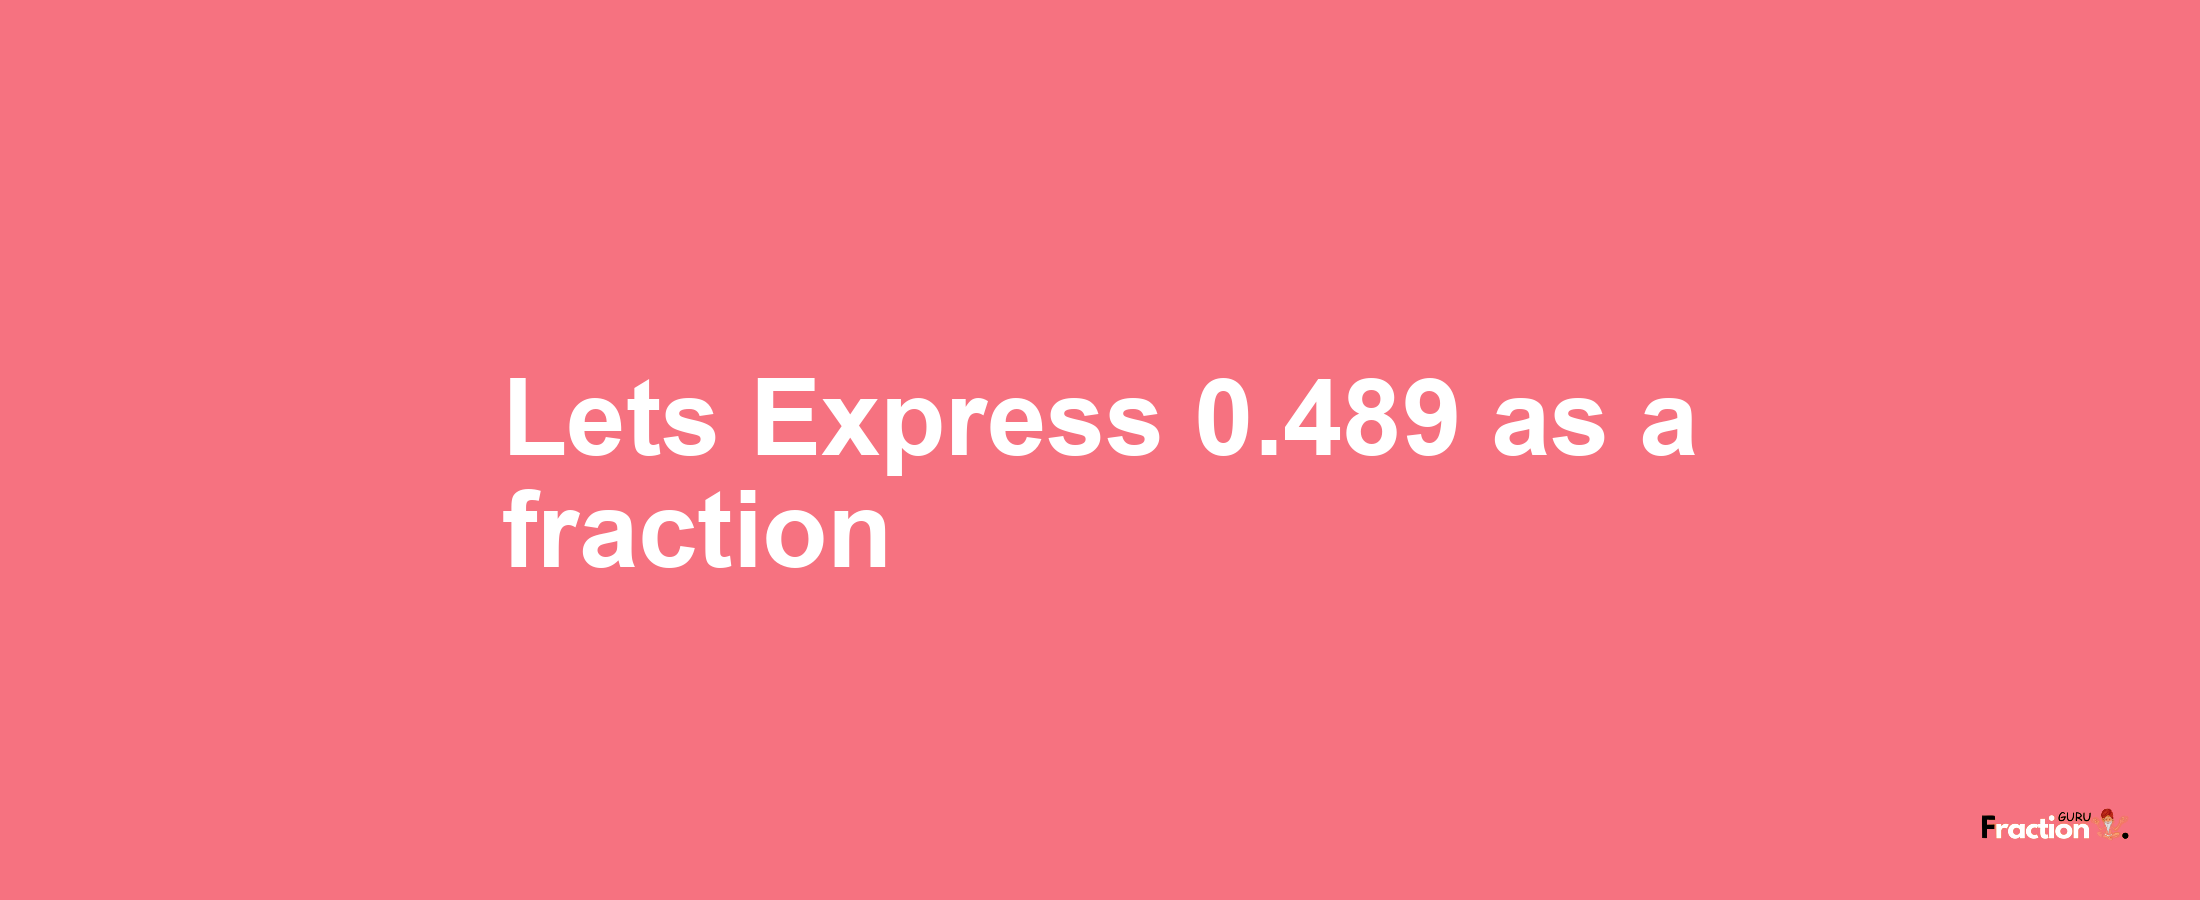 Lets Express 0.489 as afraction